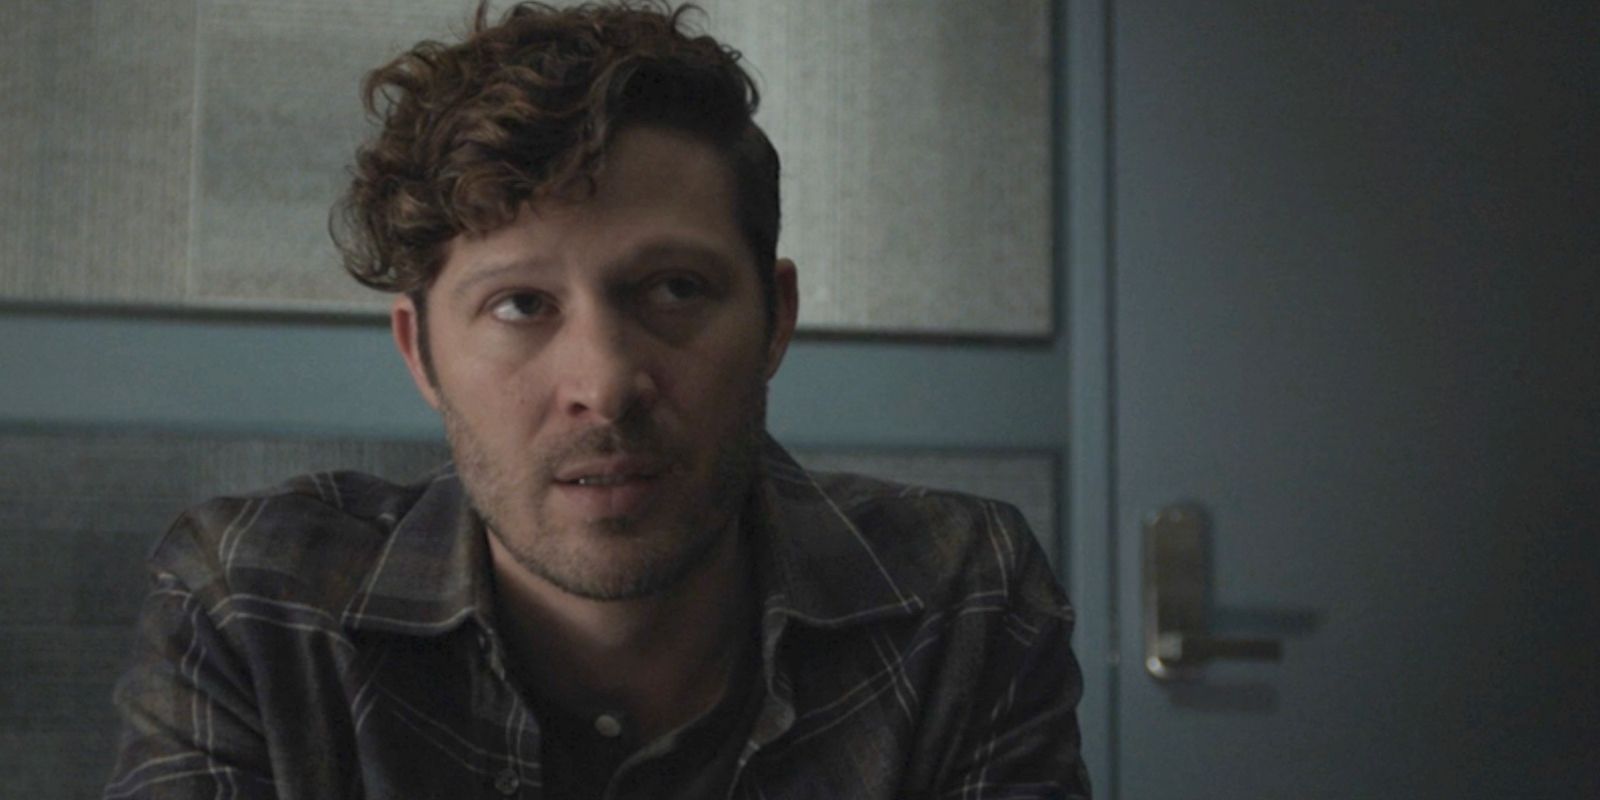 Zach Gilford as Elias Voit looking uneasily off screen in Criminal Minds: Evolution